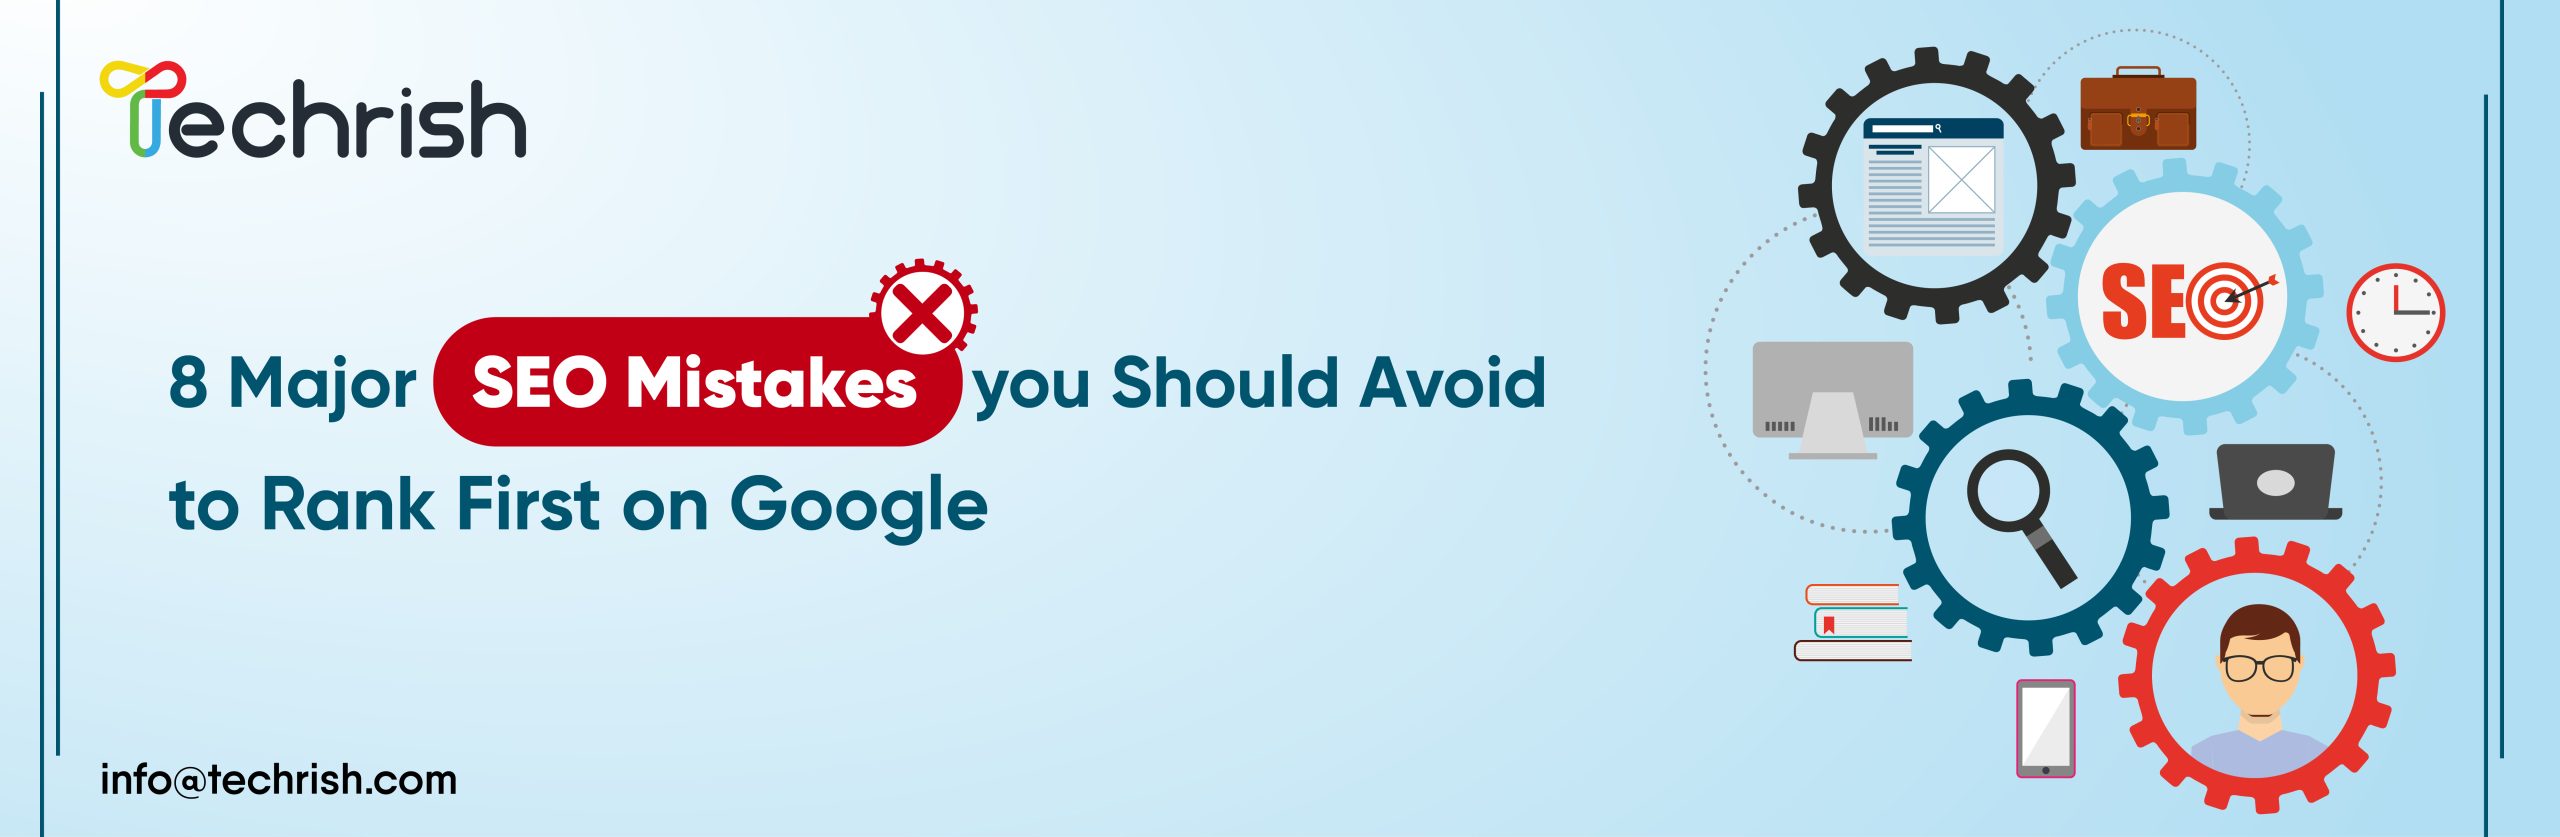 8 Major SEO Mistakes you should avoid to Rank first on Google